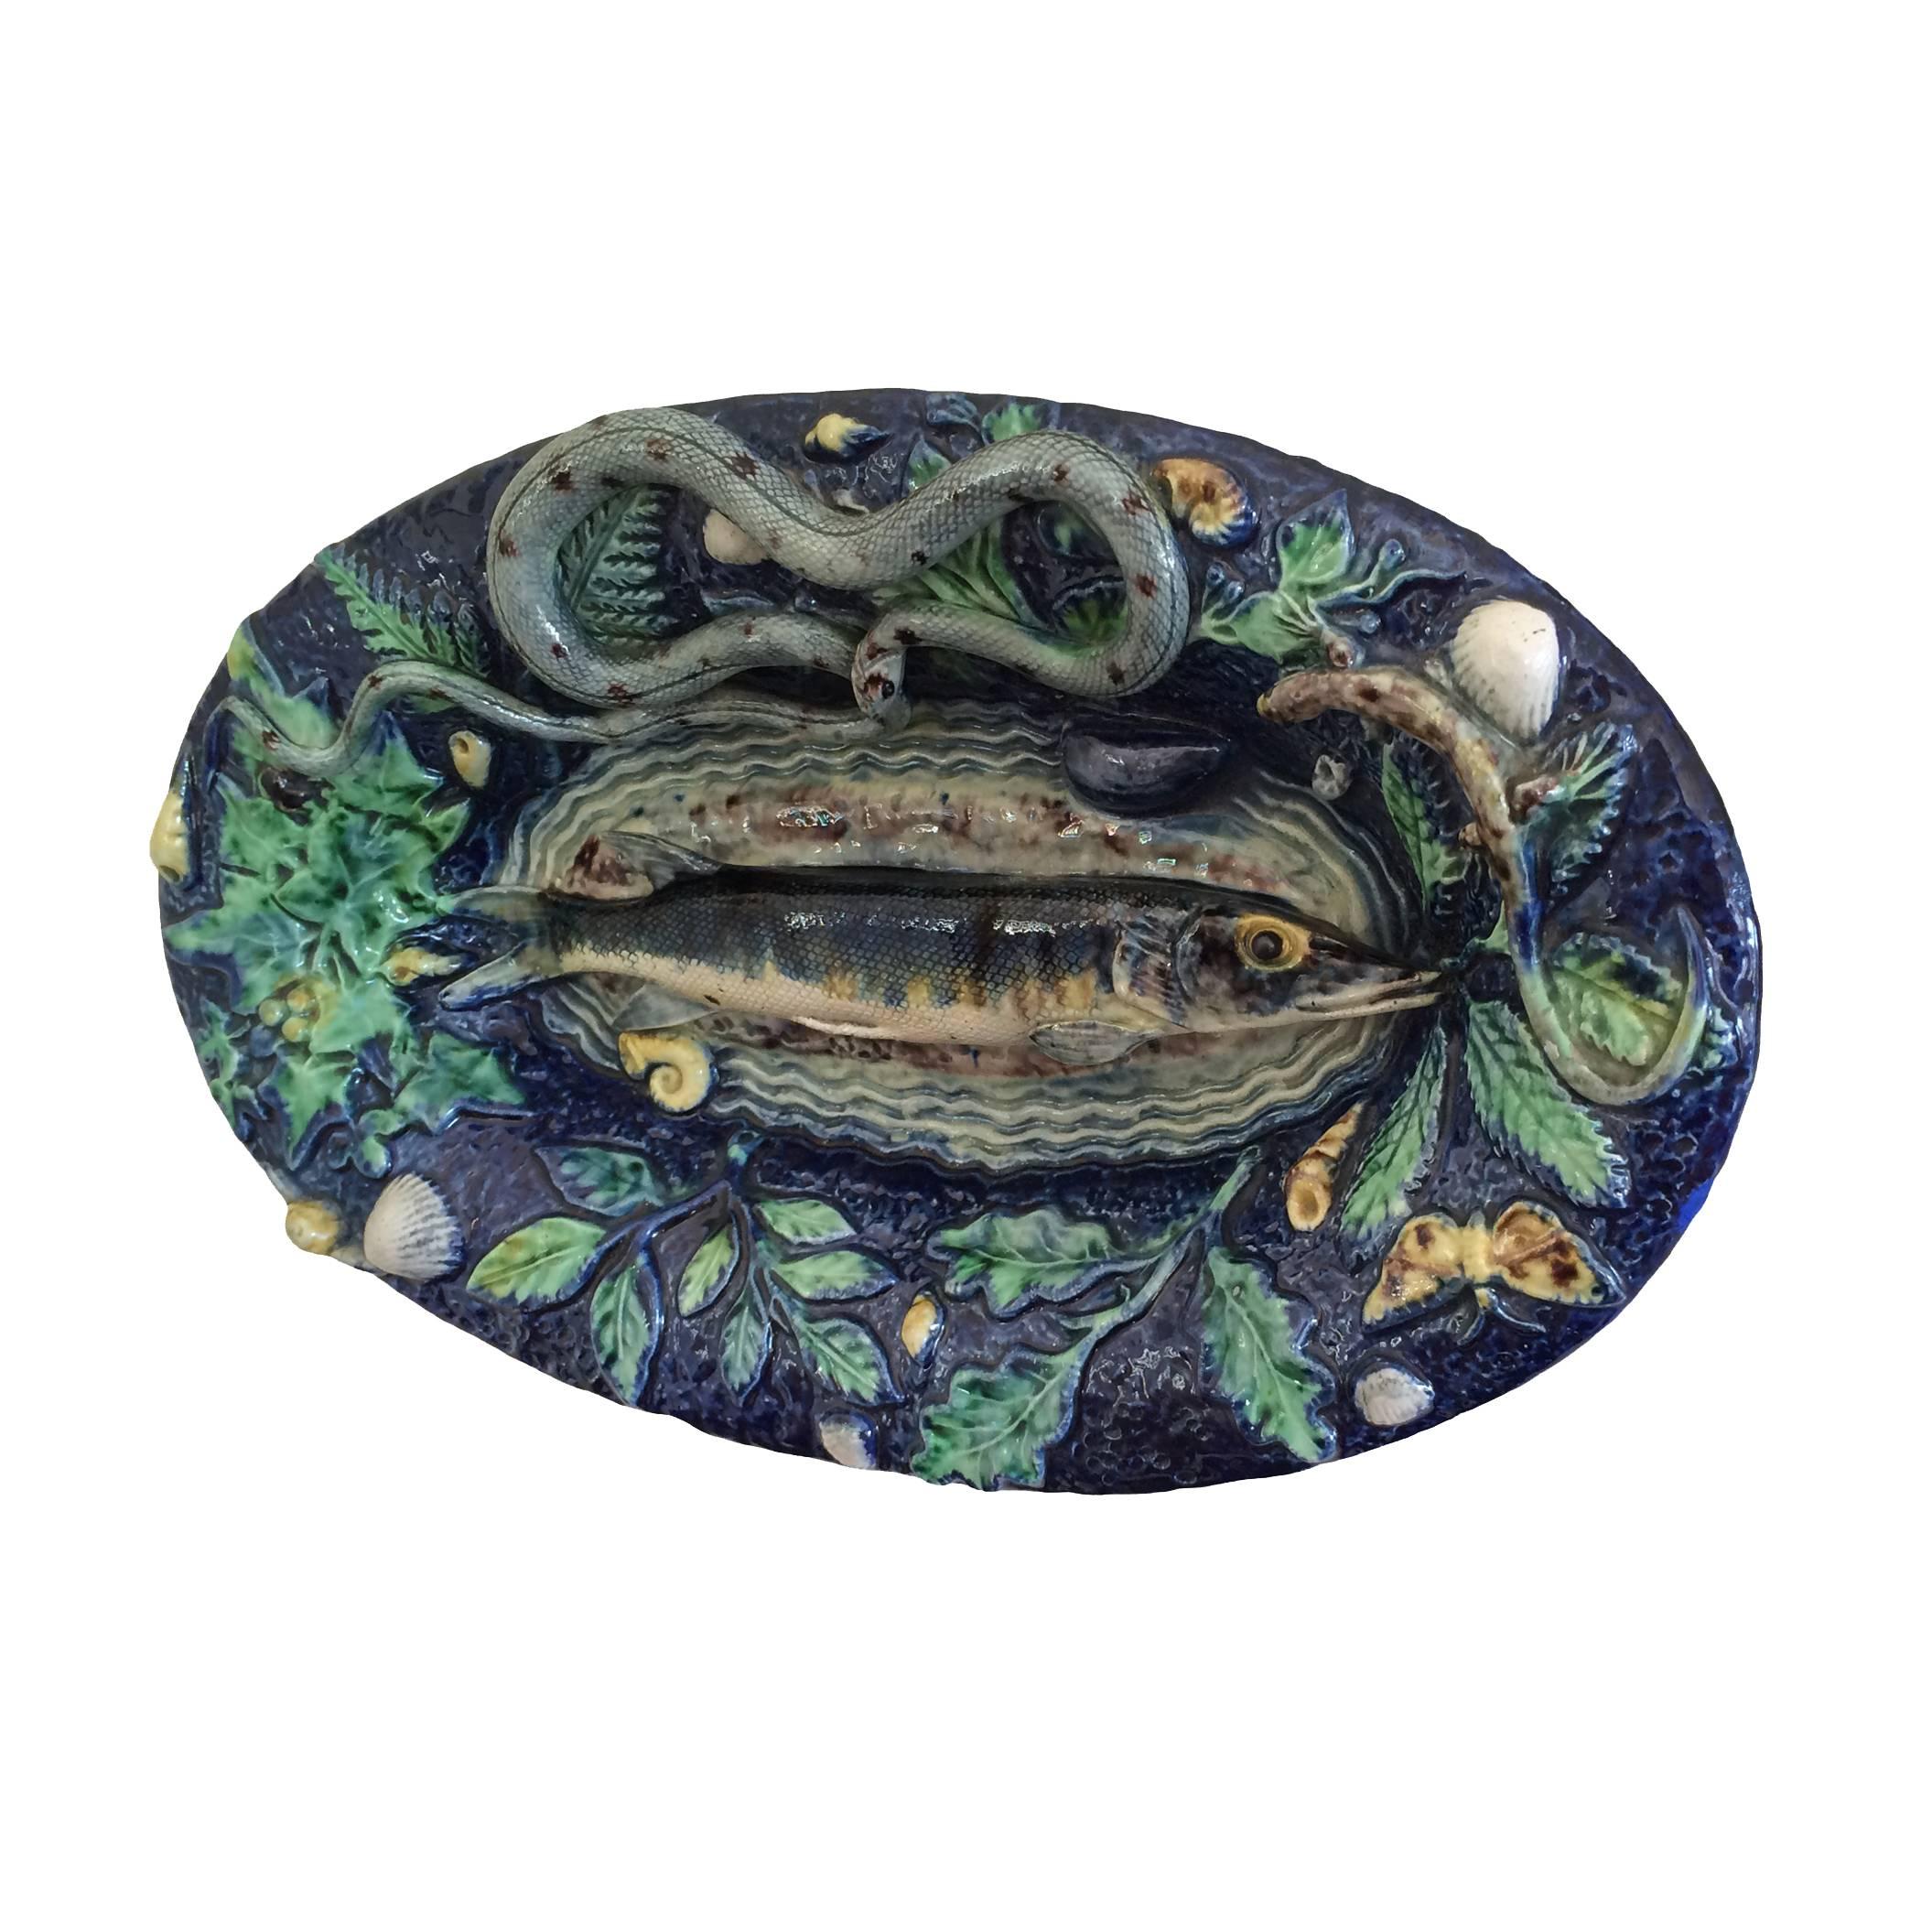 French Majolica Pallissy Trompe L'oeil hand-painted platter; depicting fish surrounded by snakes, butterflies, shells and vines, 19th century.
 